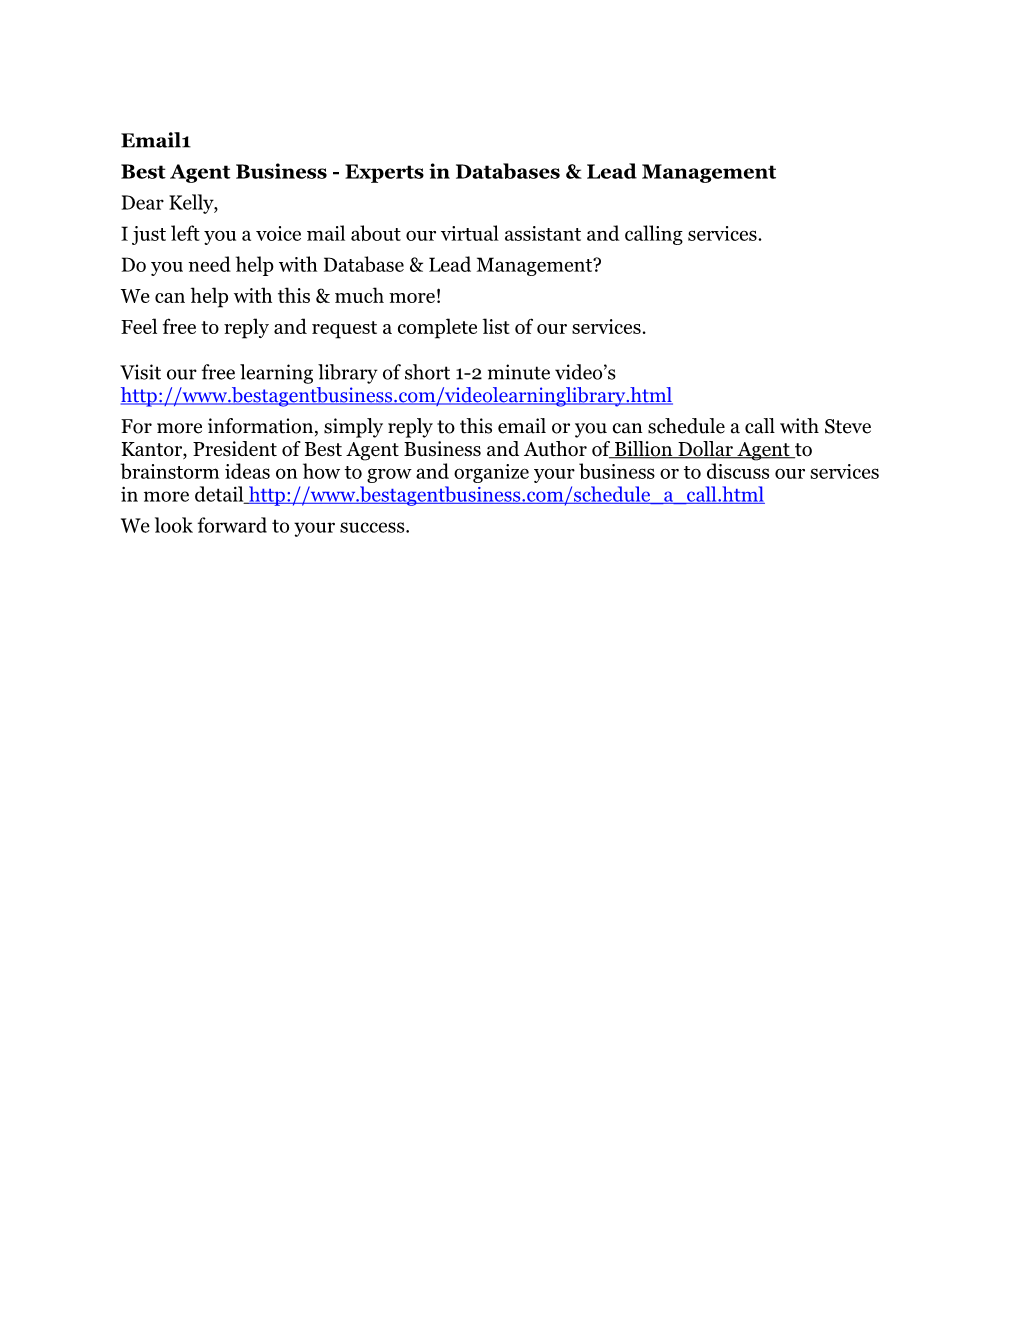 Best Agent Business - Experts in Databases & Lead Management